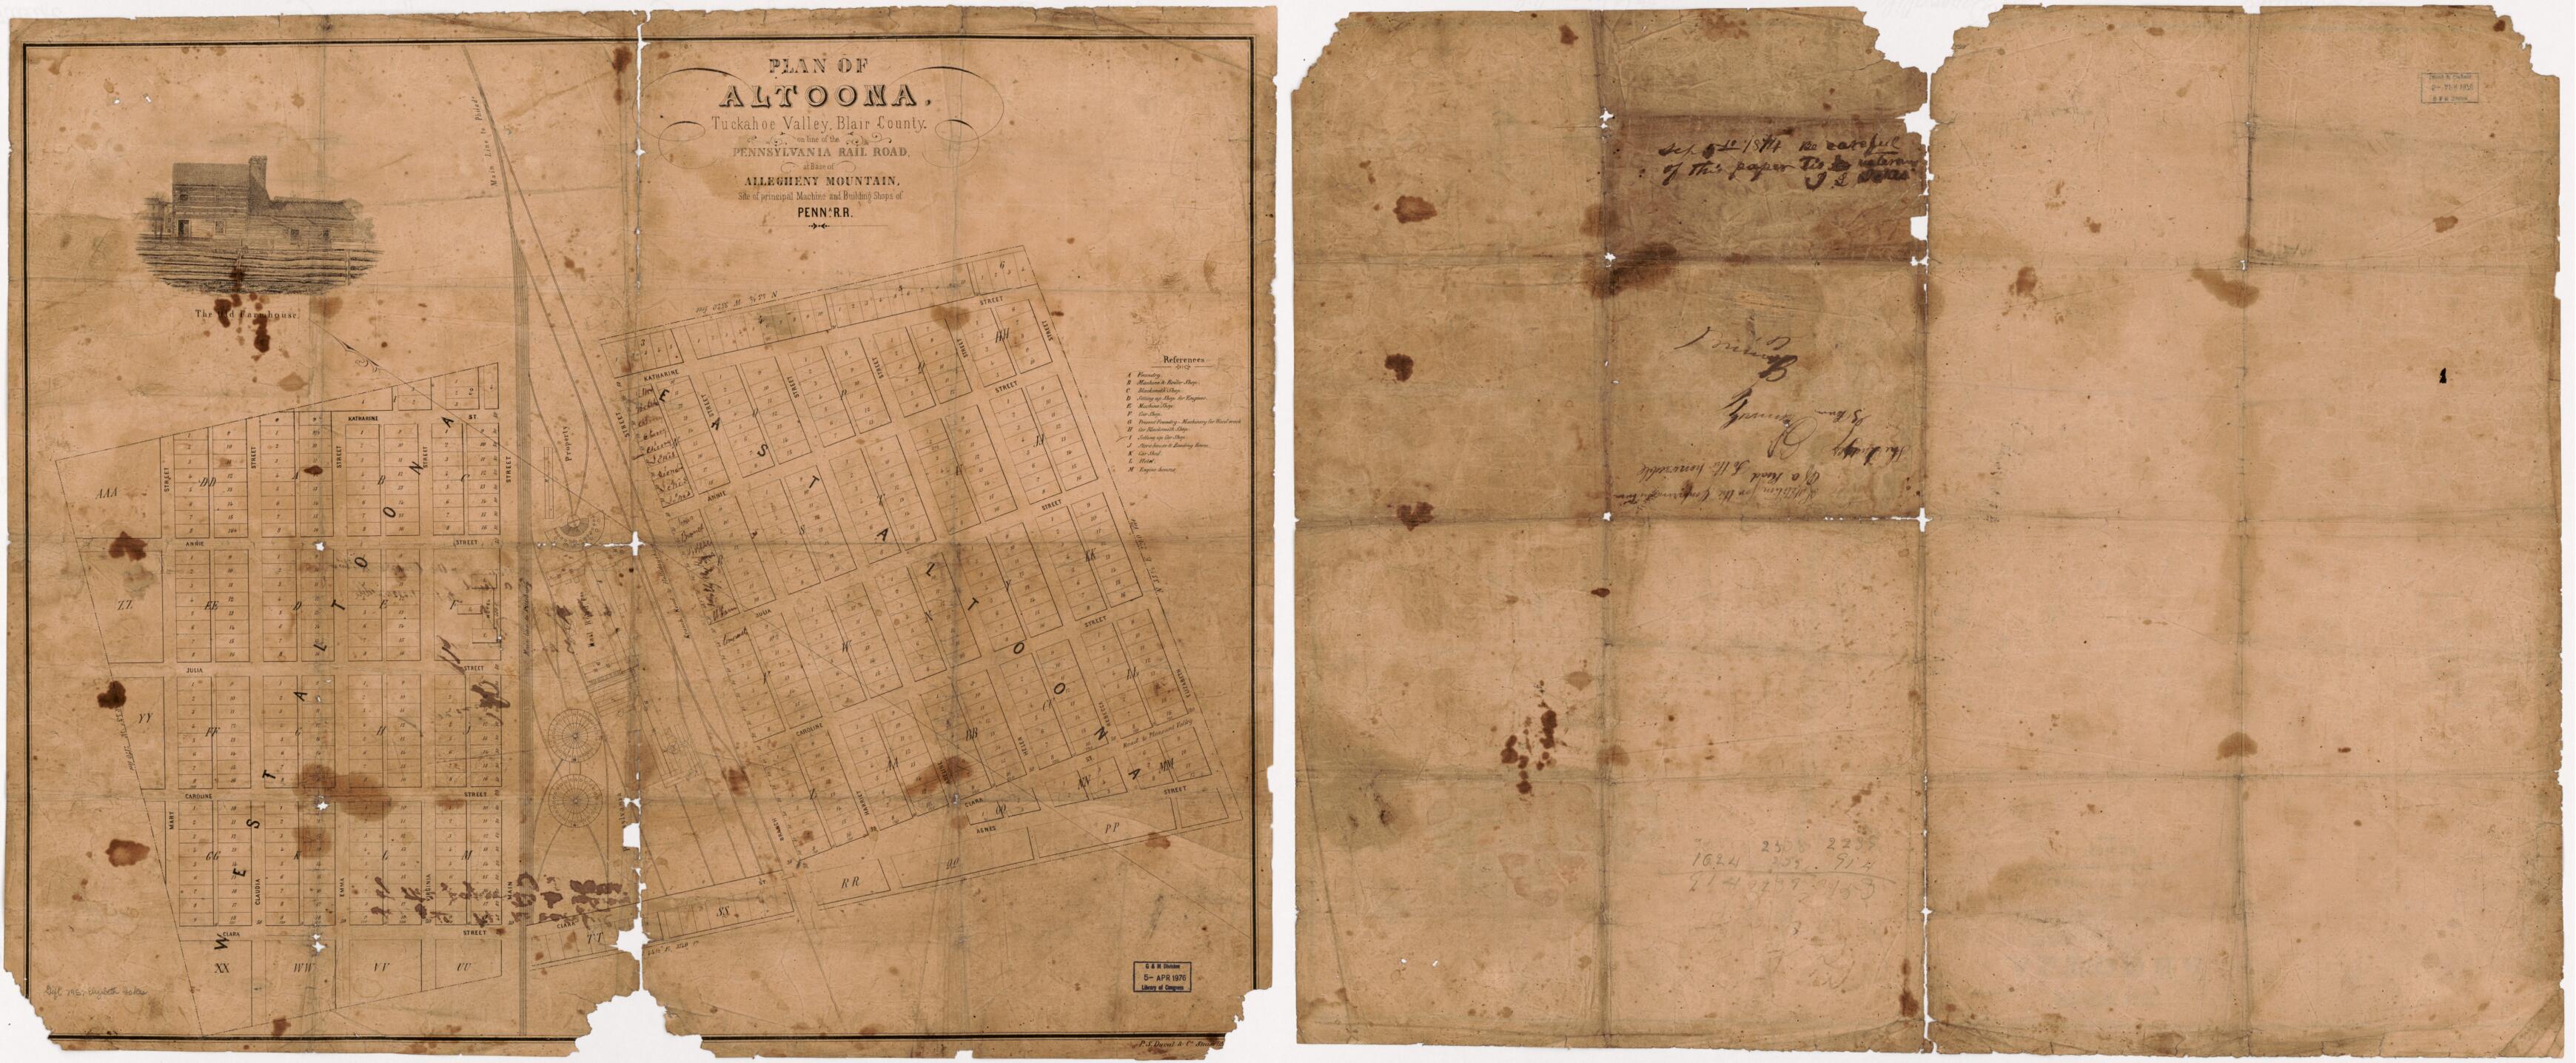 This old map of Plan of Altoona, Tuckahoe Valley, Blair County, On the Line of the Pennsylvania Rail Road, at Base of Allegheny Mountain, Site of Principal Machine and Building Shops of Penna. R.R from 1874 was created by  P.S. Duval &amp; Co in 1874